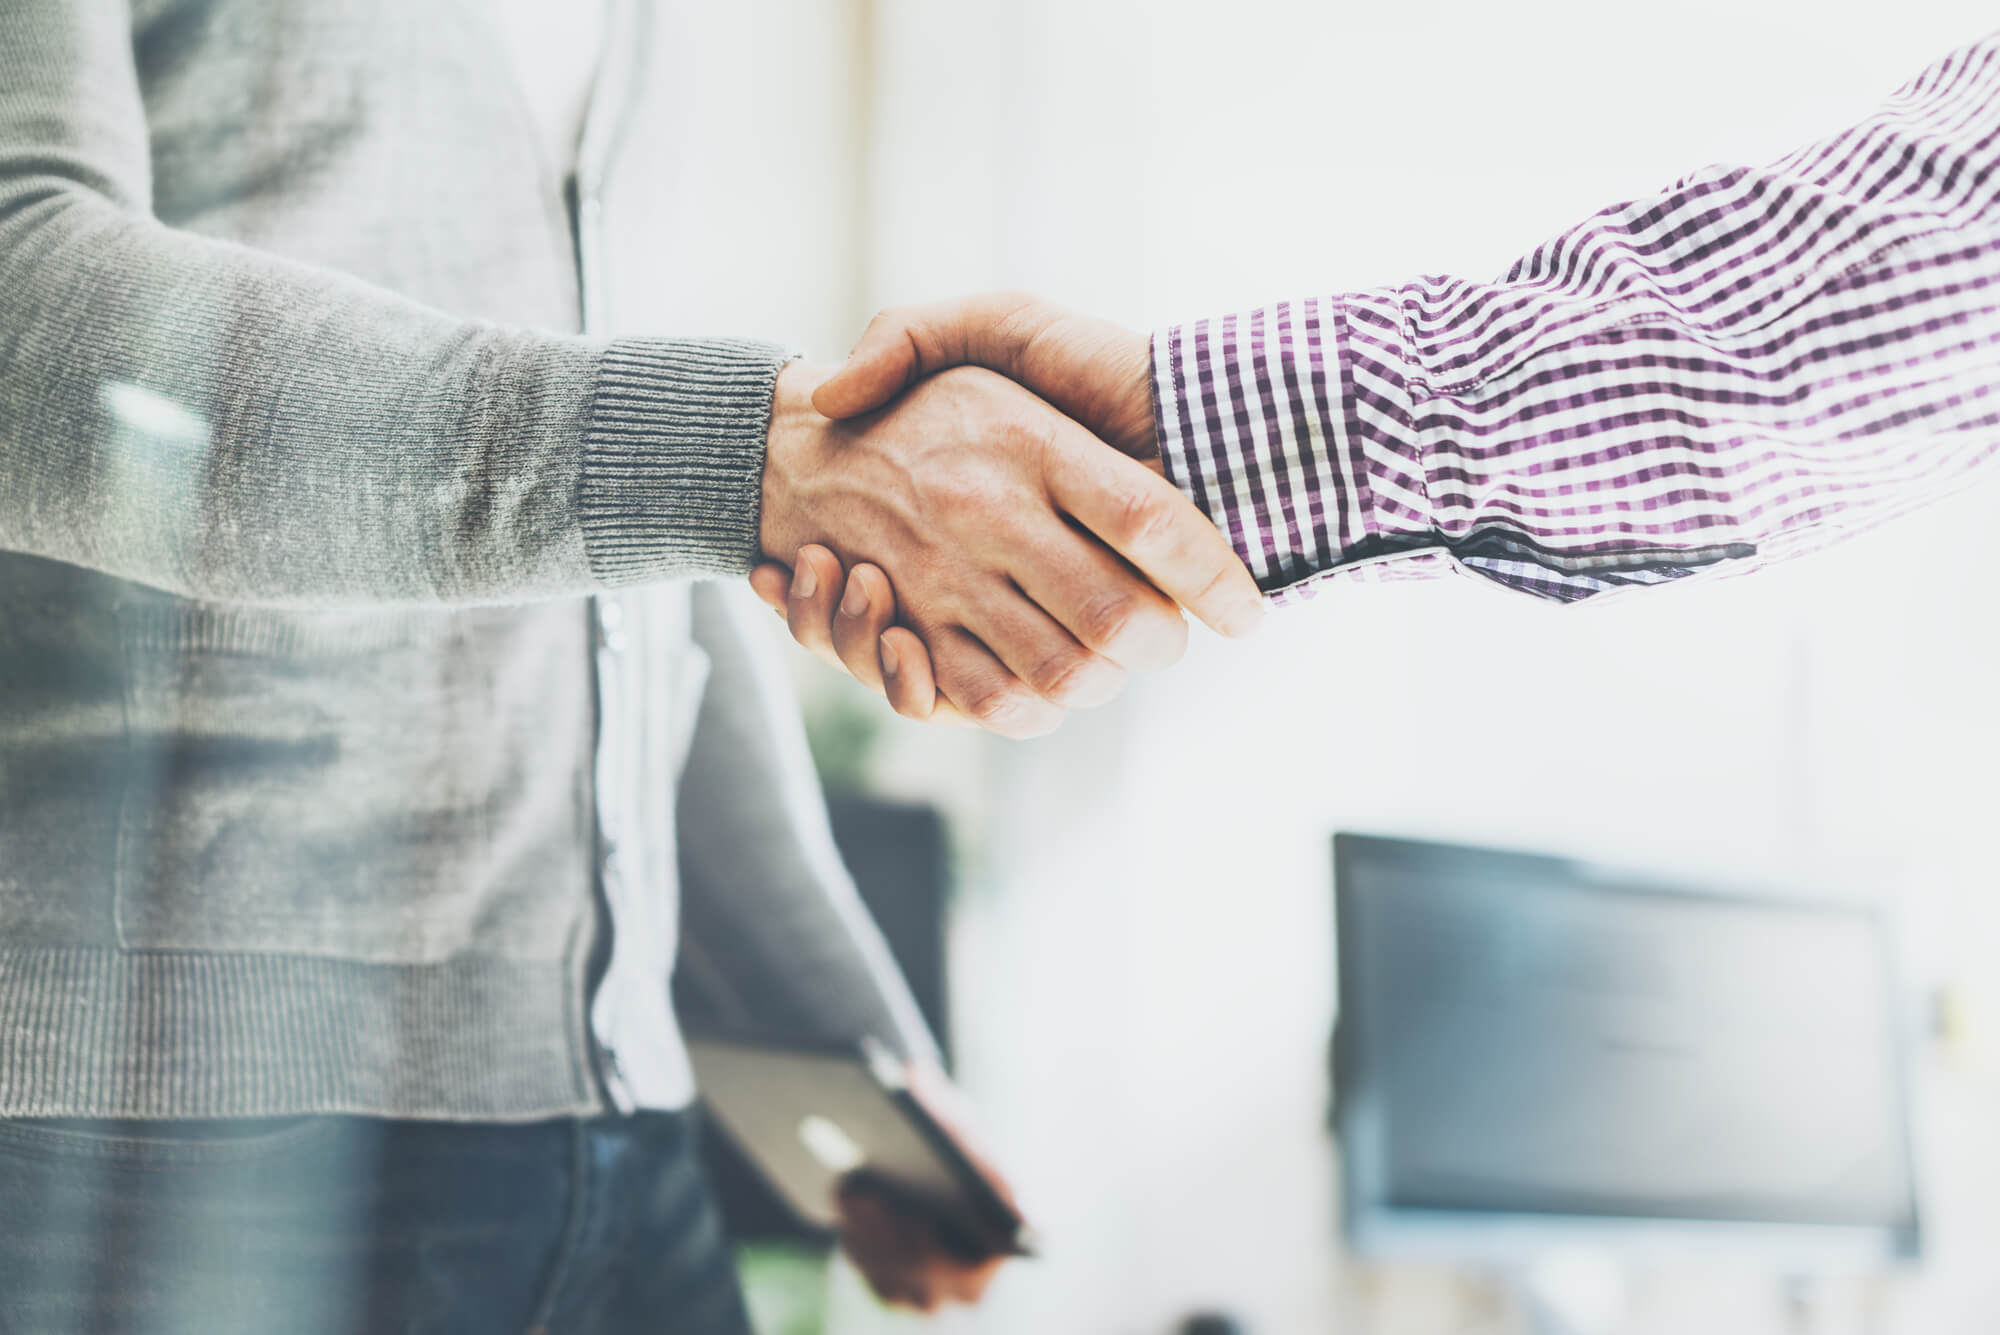 shaking hands after purchasing a Home Based Franchise